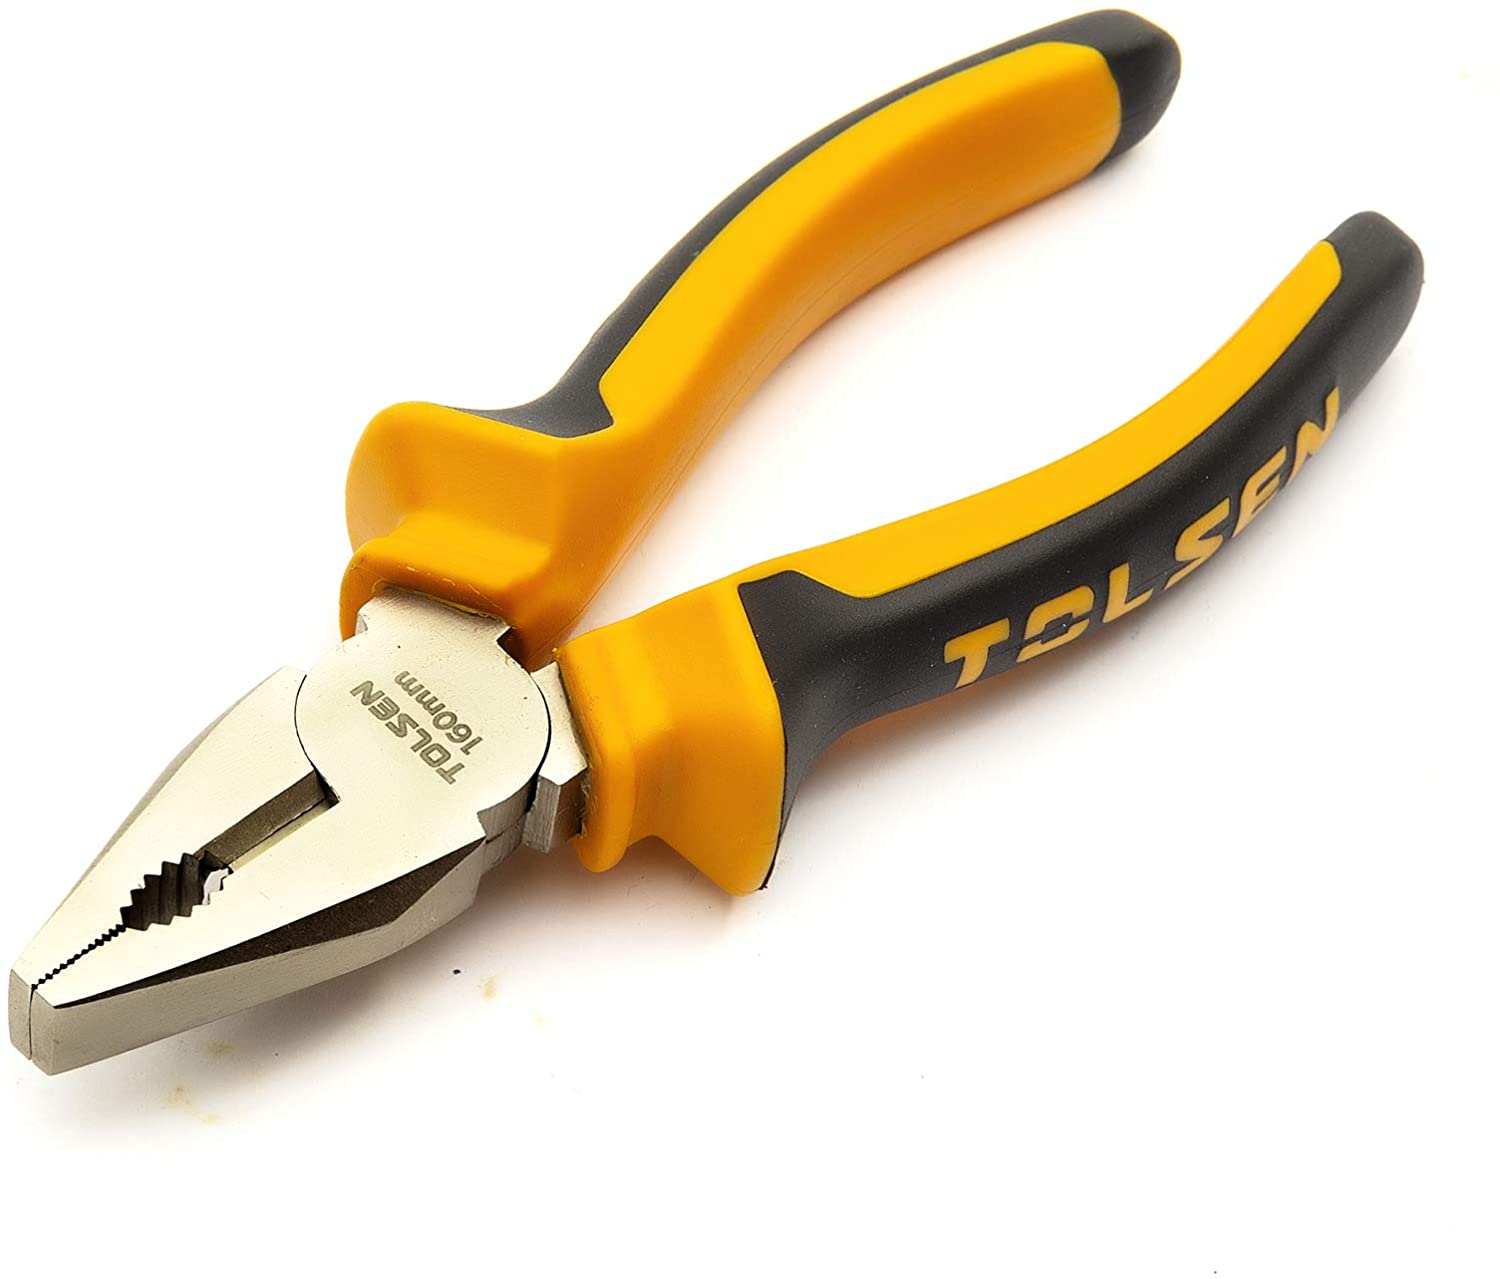 COMPINATION PLIERS 8 INCH